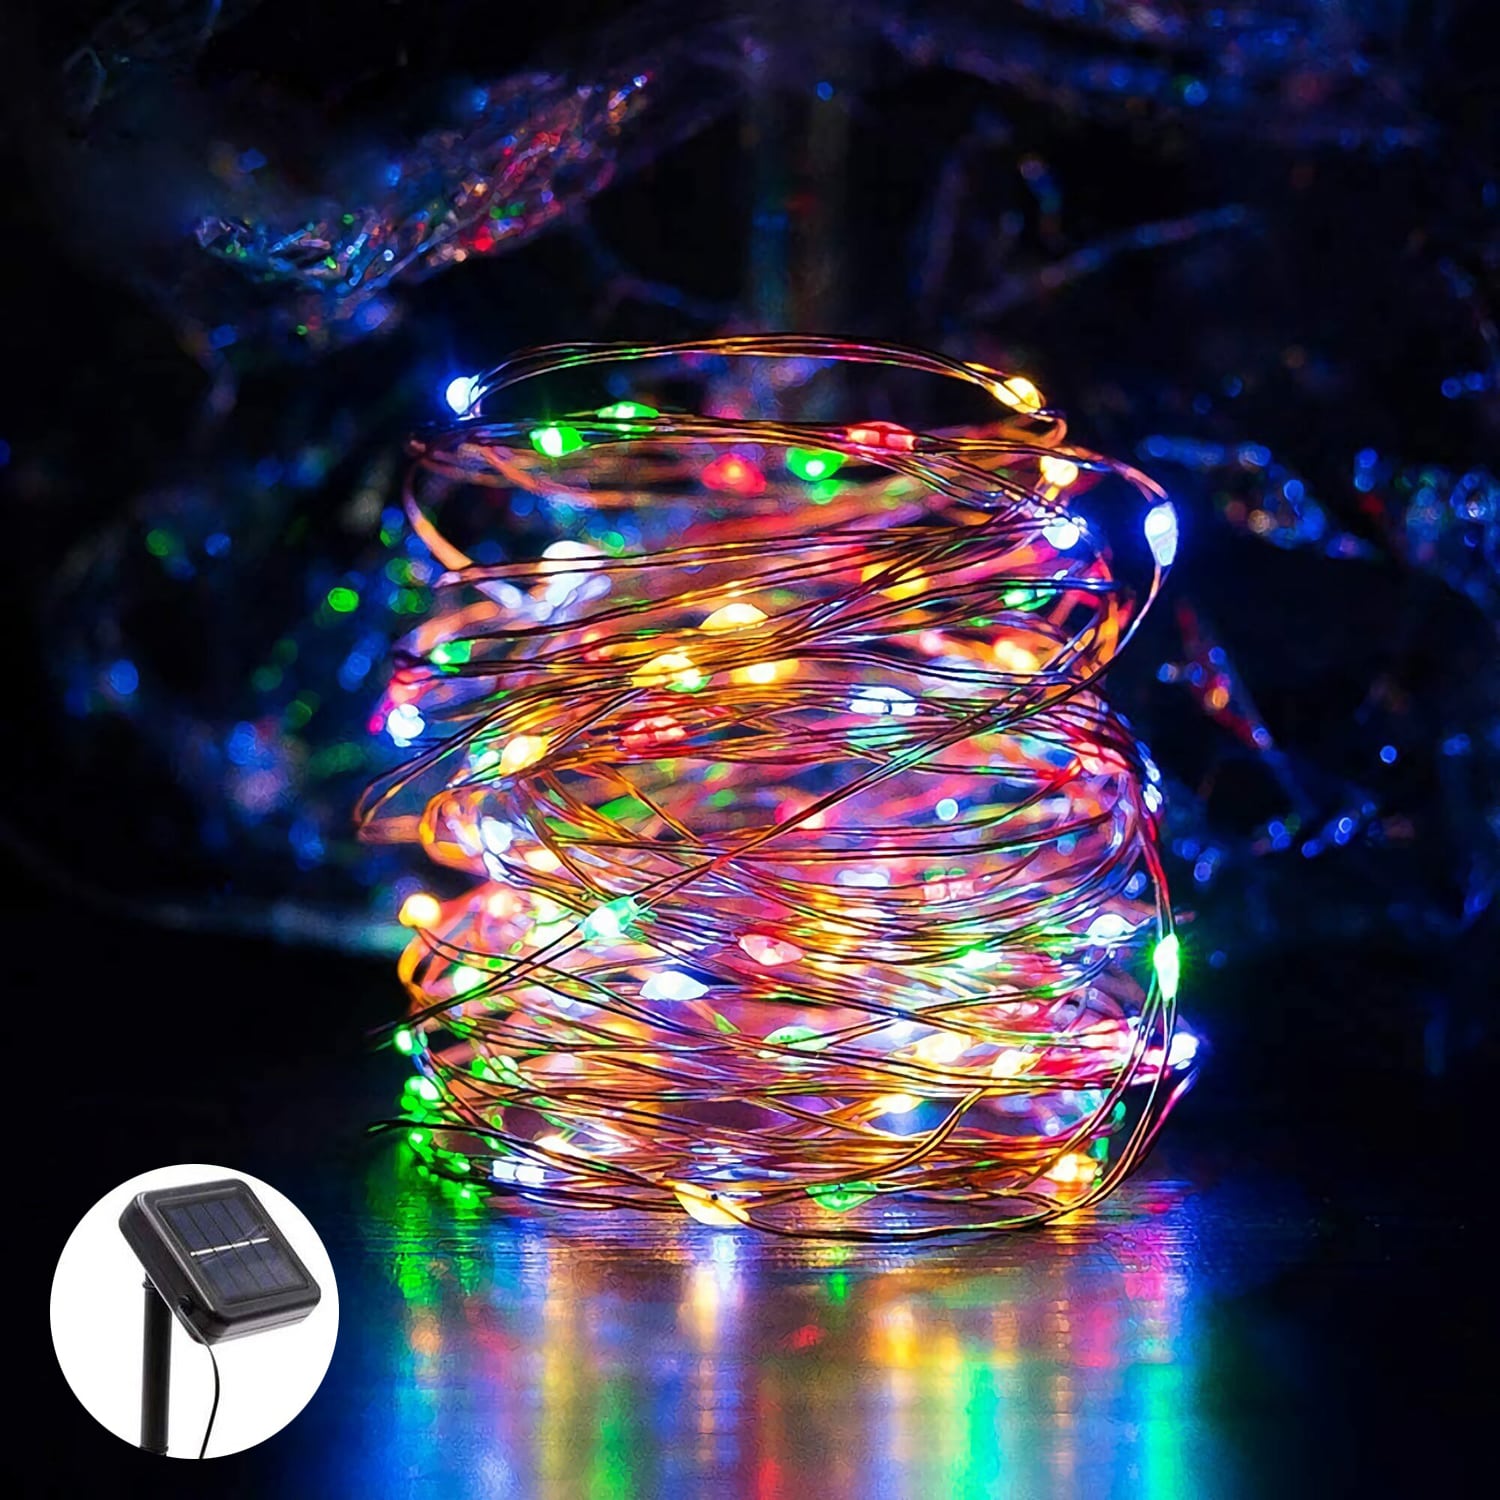 Outdoor Solar String Lights LED Waterproof Copper Wire Xmas Garden Party Decor 